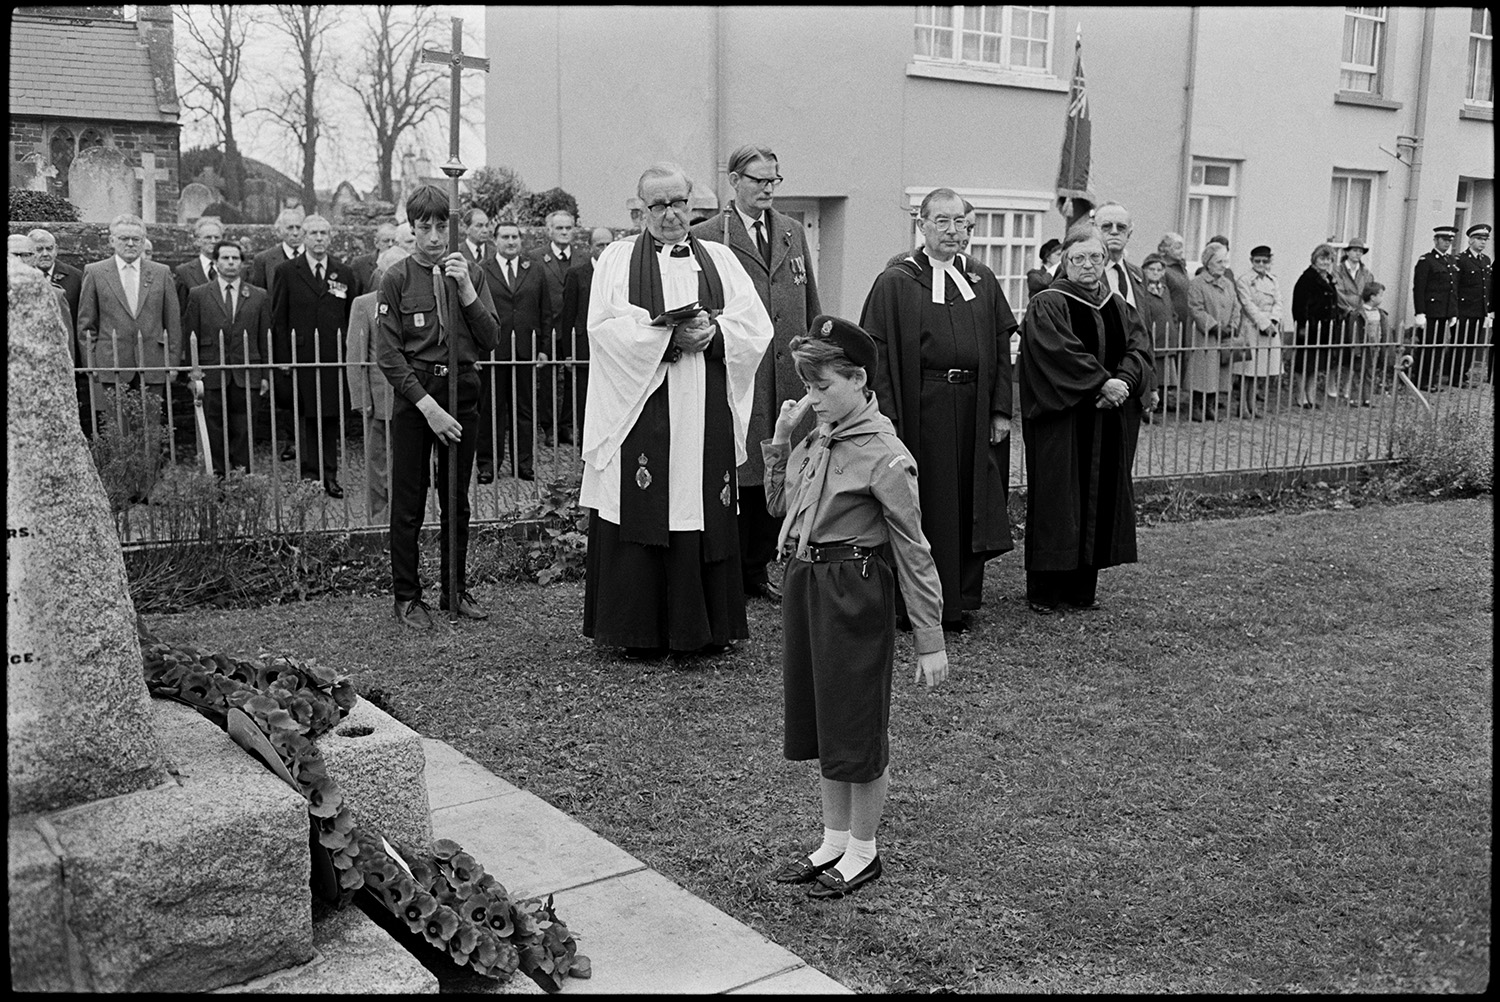 Parade at Memorial, laying wreaths by men, women and scouts. Vicar saying prayers.
[People assembling for the Remembrance Sunday wreath laying ceremony at the war memorial in the square at Chulmleigh. The Reverend John Richards is taking the service. A Girl Guide salutes after laying a wreath on the memorial step. IN the background a scout carries a cross, and a woman carries a Royal British Legion flag. ]